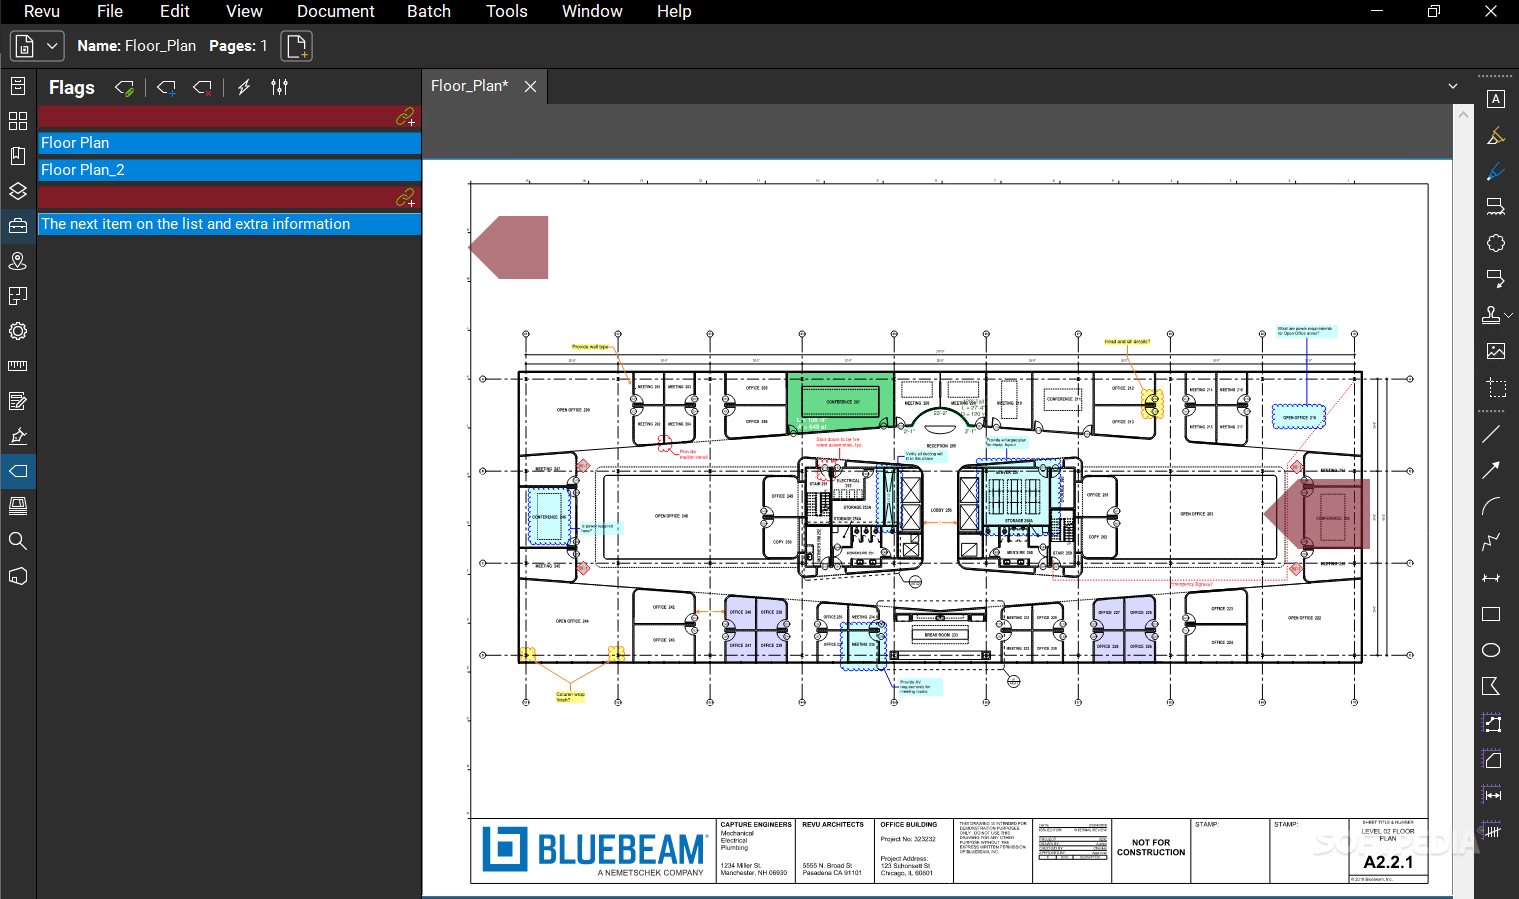 Bluebeam Revu eXtreme 21.0.45 download the last version for apple